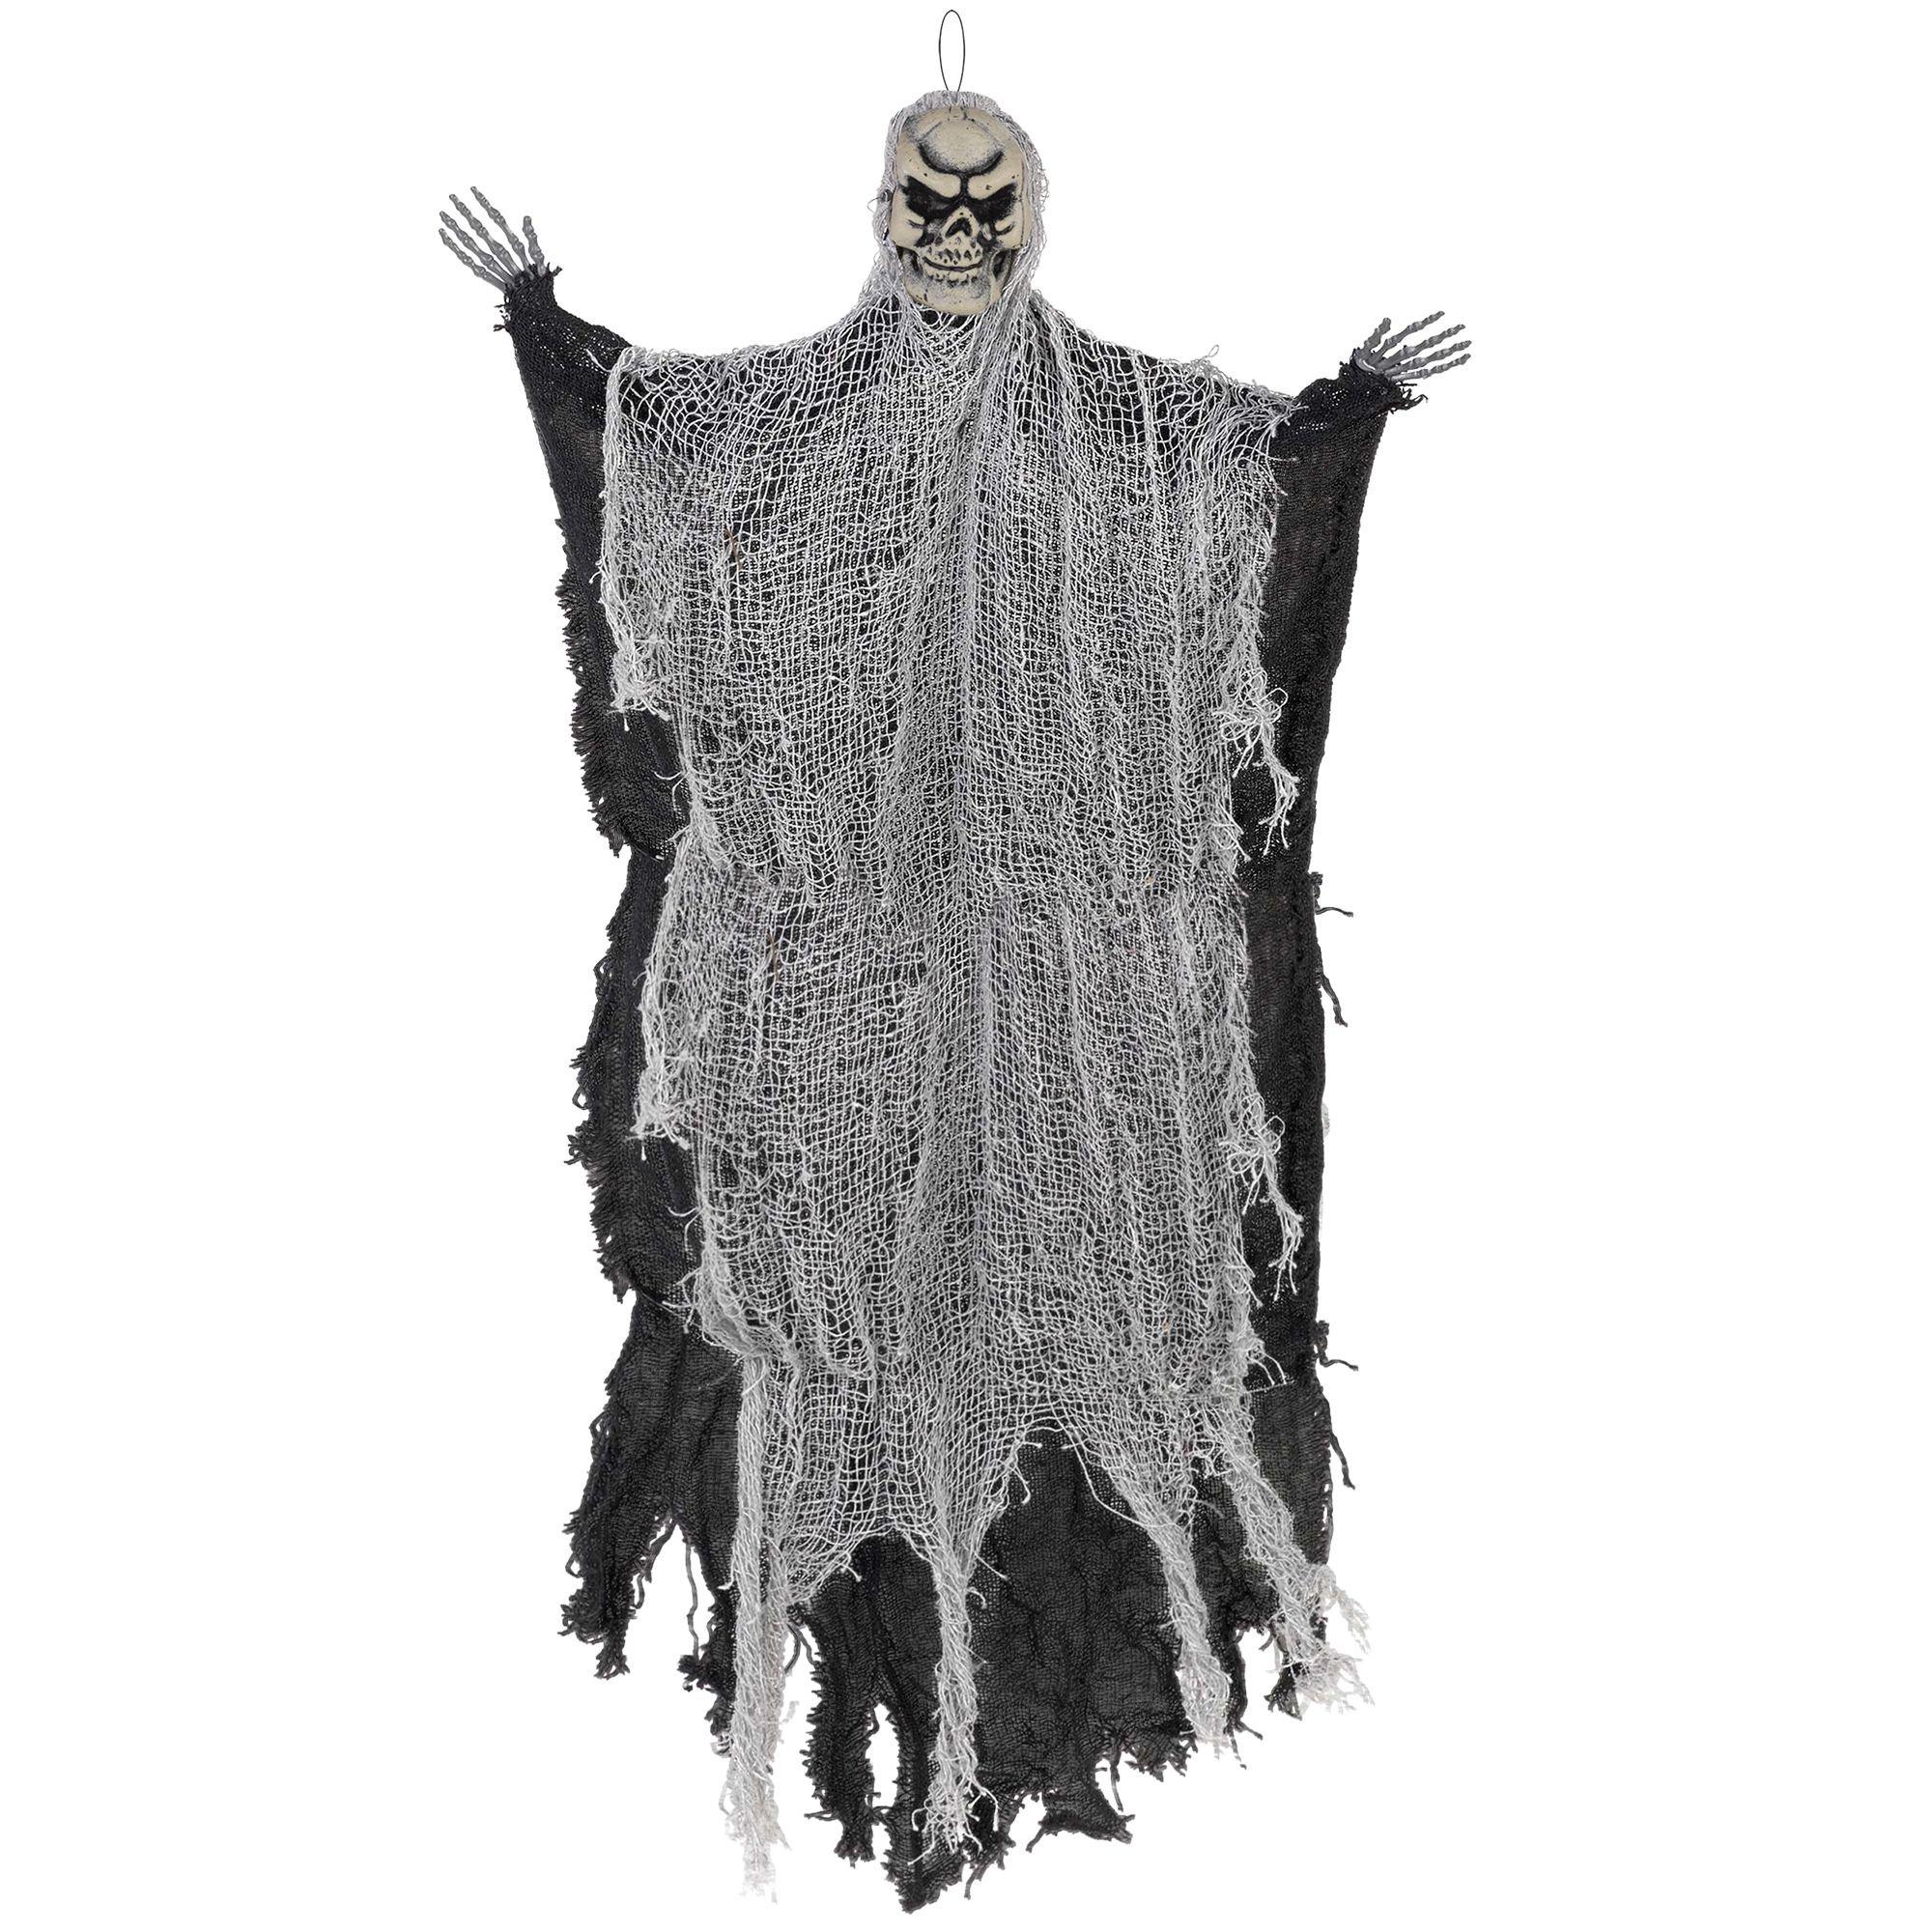 Small Haunting Reaper Decoration 24in | Party City